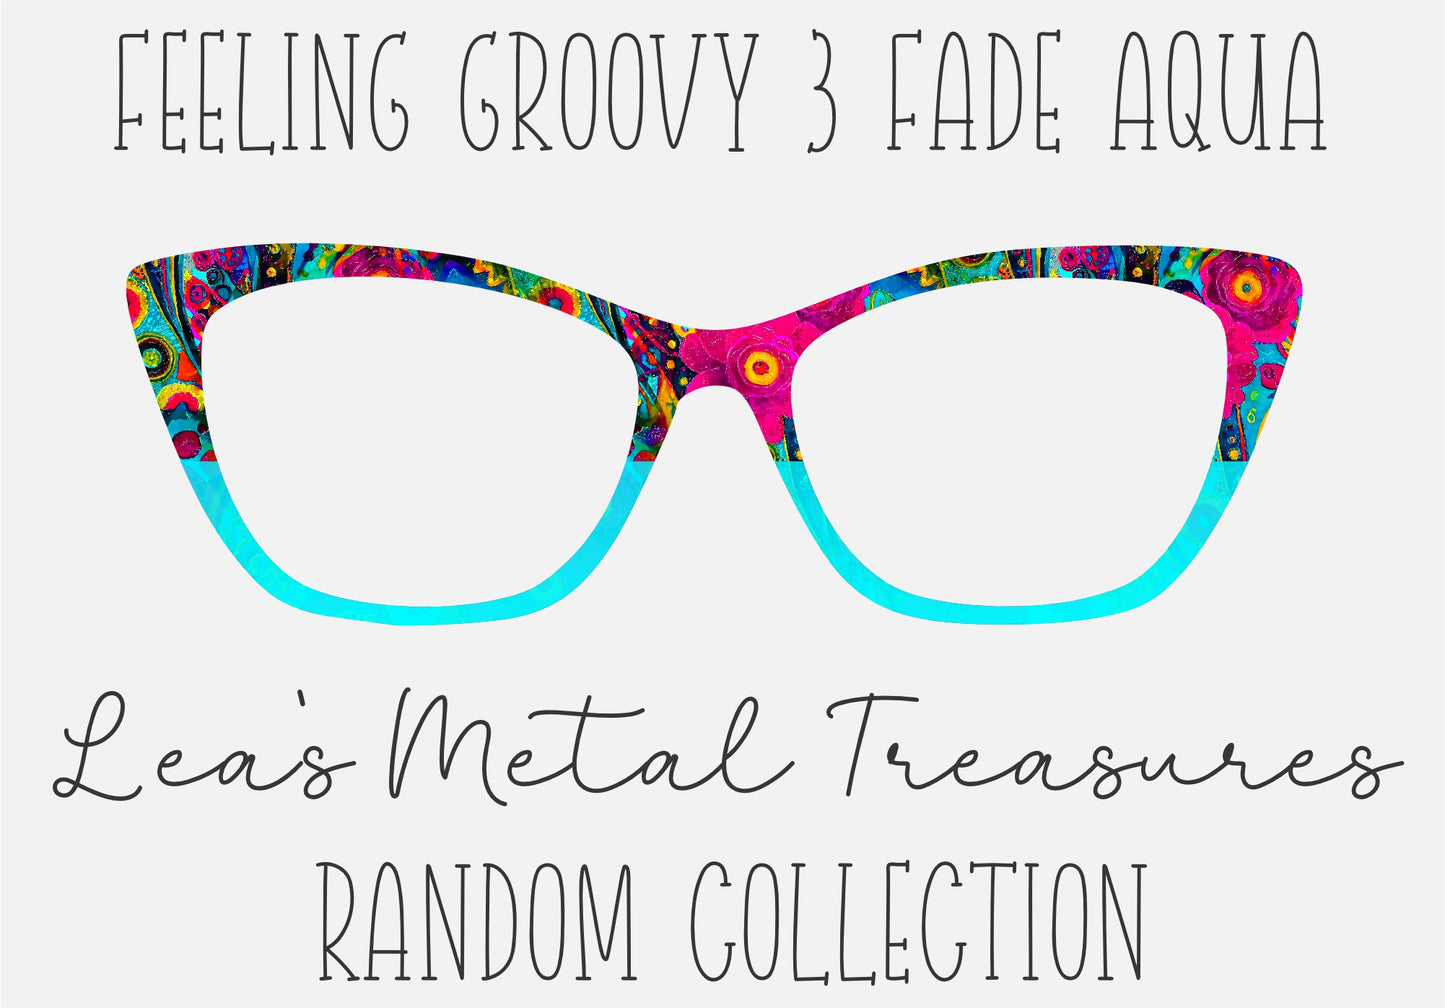 Feeling Groovy 3 fade Aqua - 00F7FD Eyewear Frame Toppers COMES WITH MAGNETS